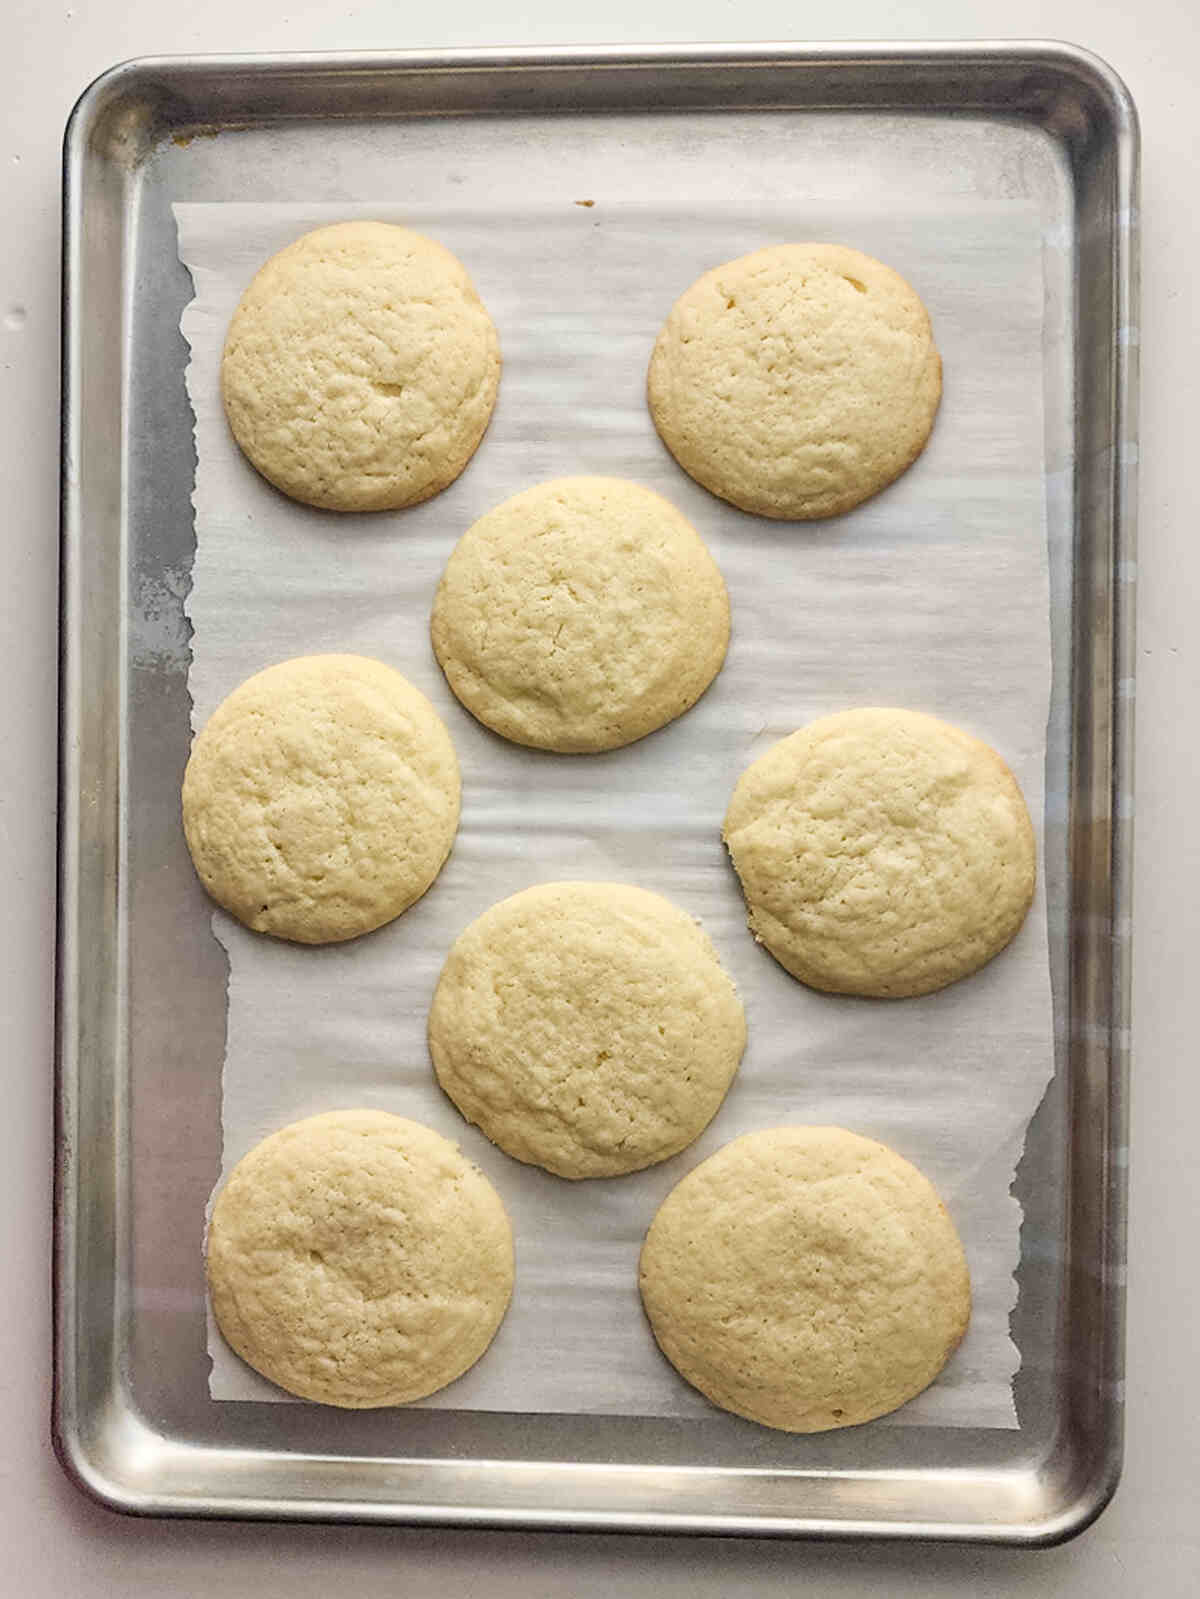 Baked cookies on a baking sheet with parchment paper.